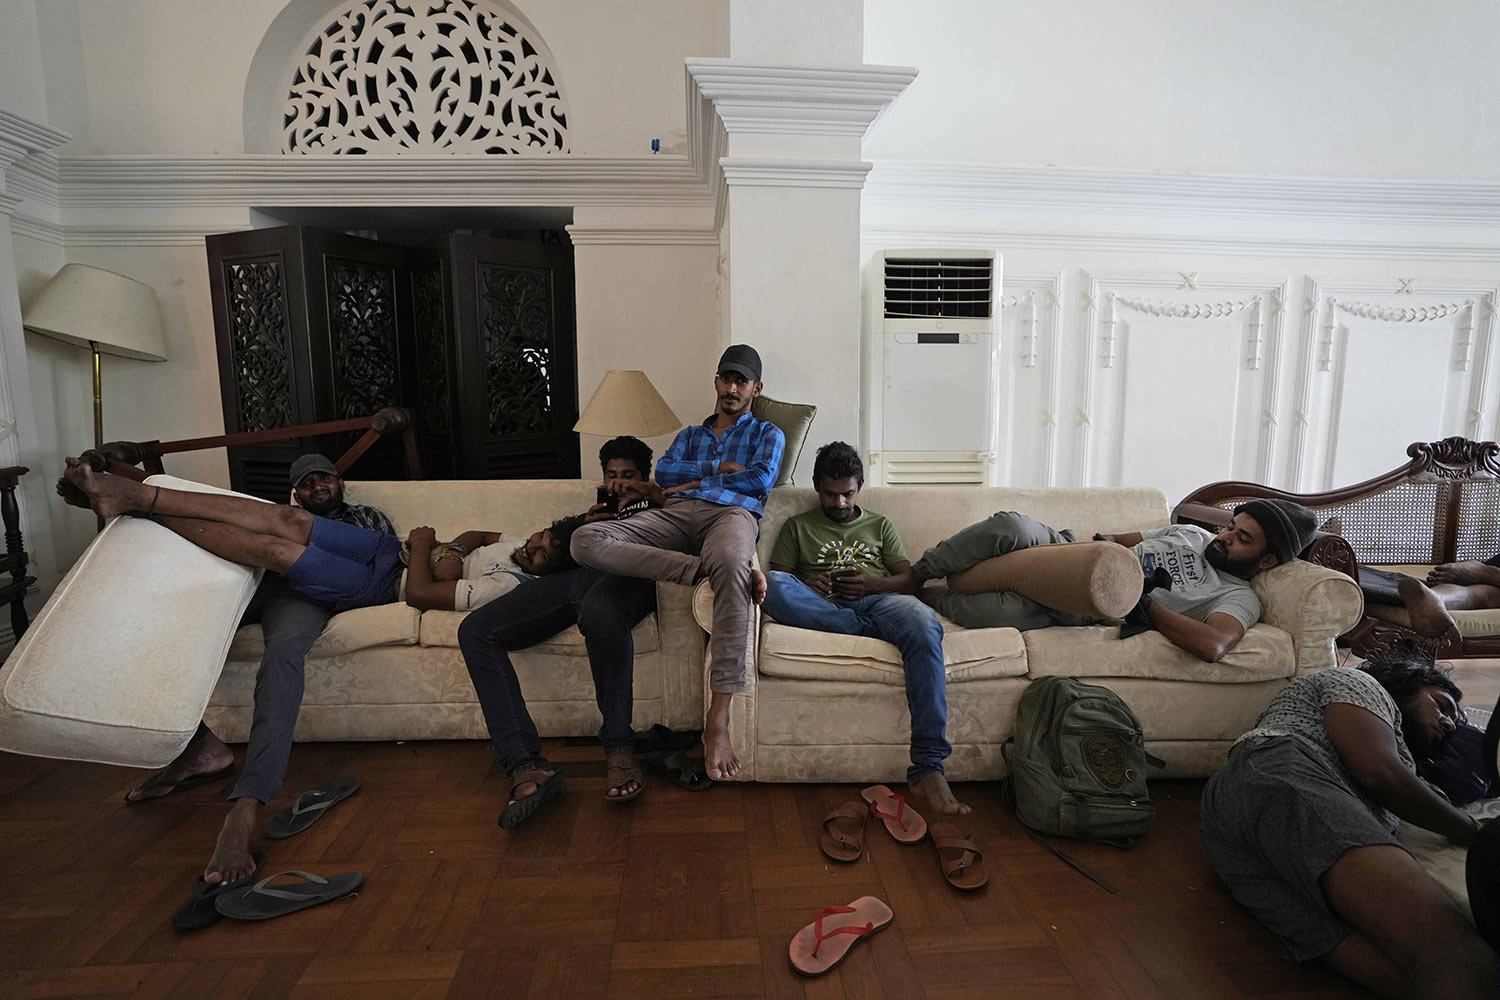  Protesters sit in the living room of the prime minister's residence a day after storming it, in Colombo, Sri Lanka, July 10, 2022. (AP Photo/Eranga Jayawardena) 